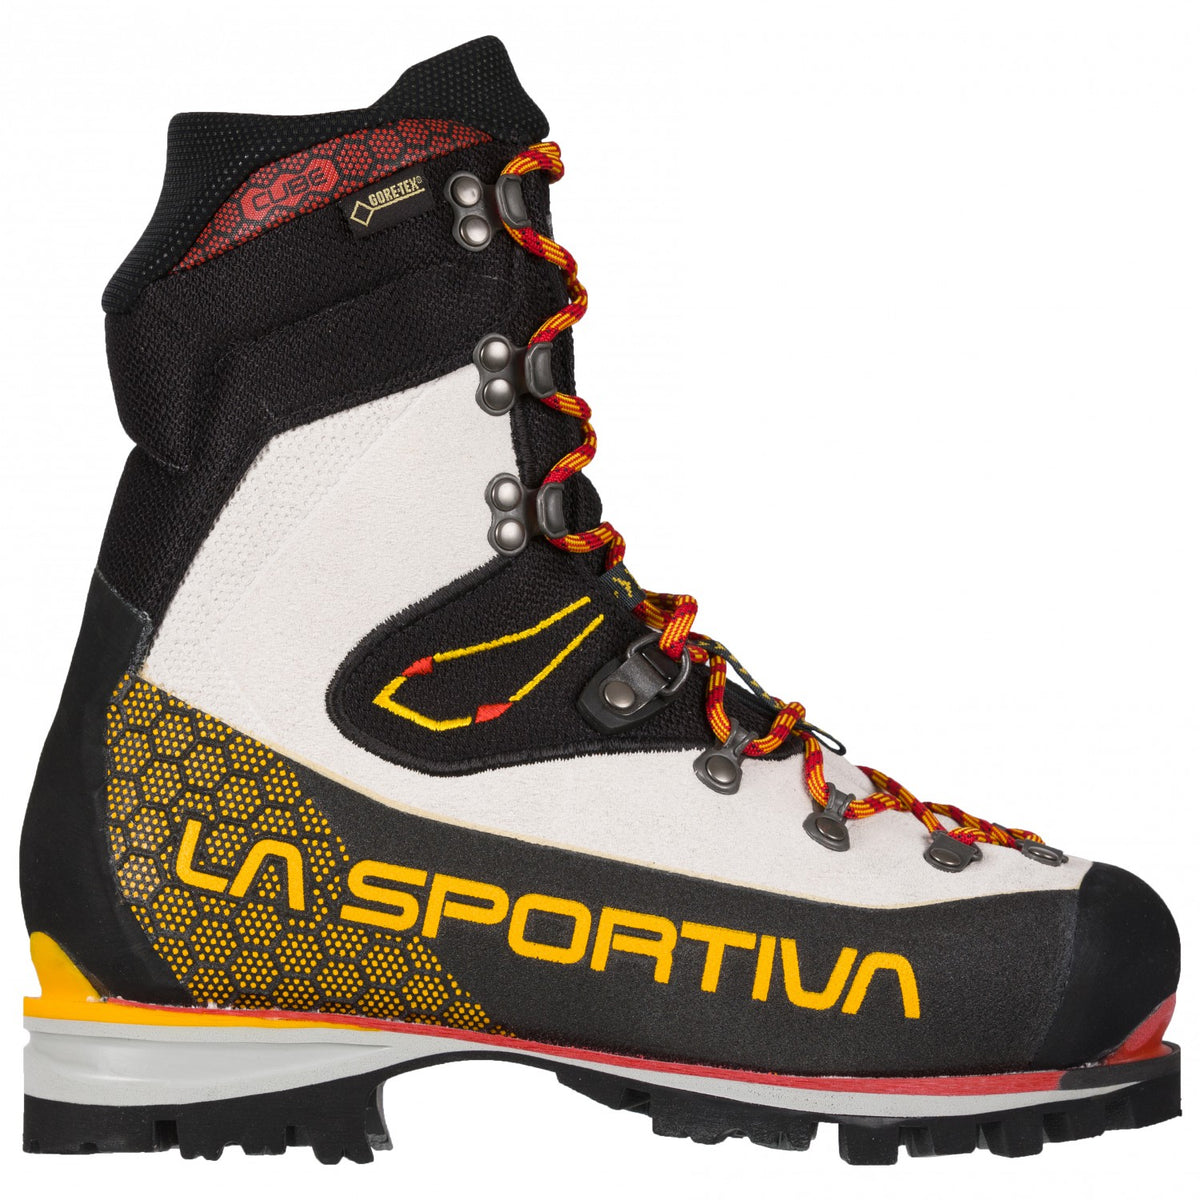 Side view of the La Sportiva Nepal Cube GTX Womens showing 2019 honeycomb design